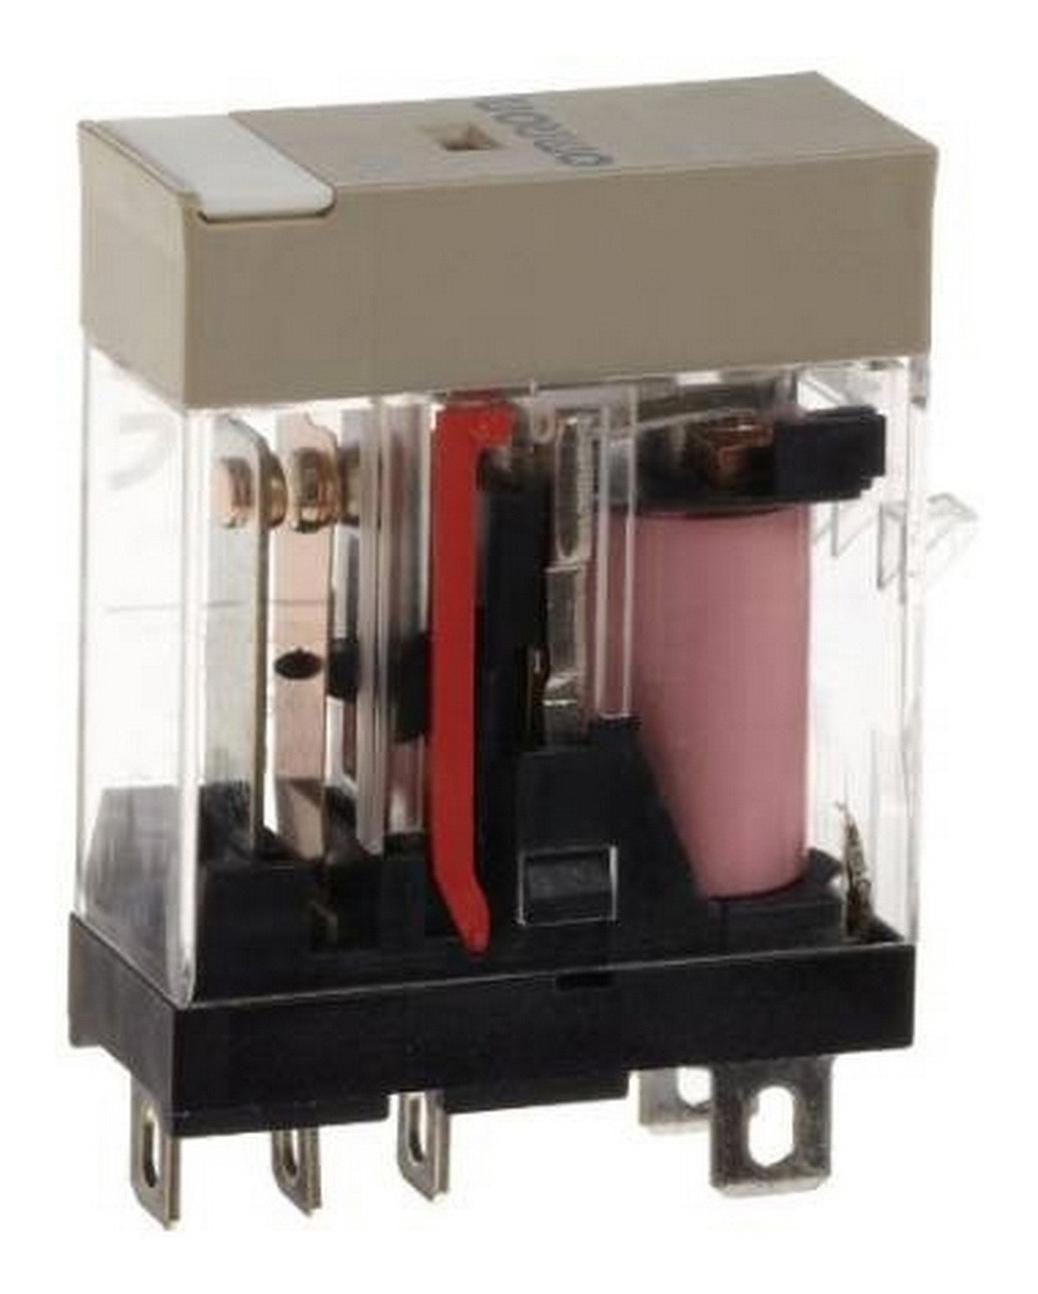 G2R-1-S 230VAC (S) POWER - GENERAL PURPOSE RELAYS OMRON